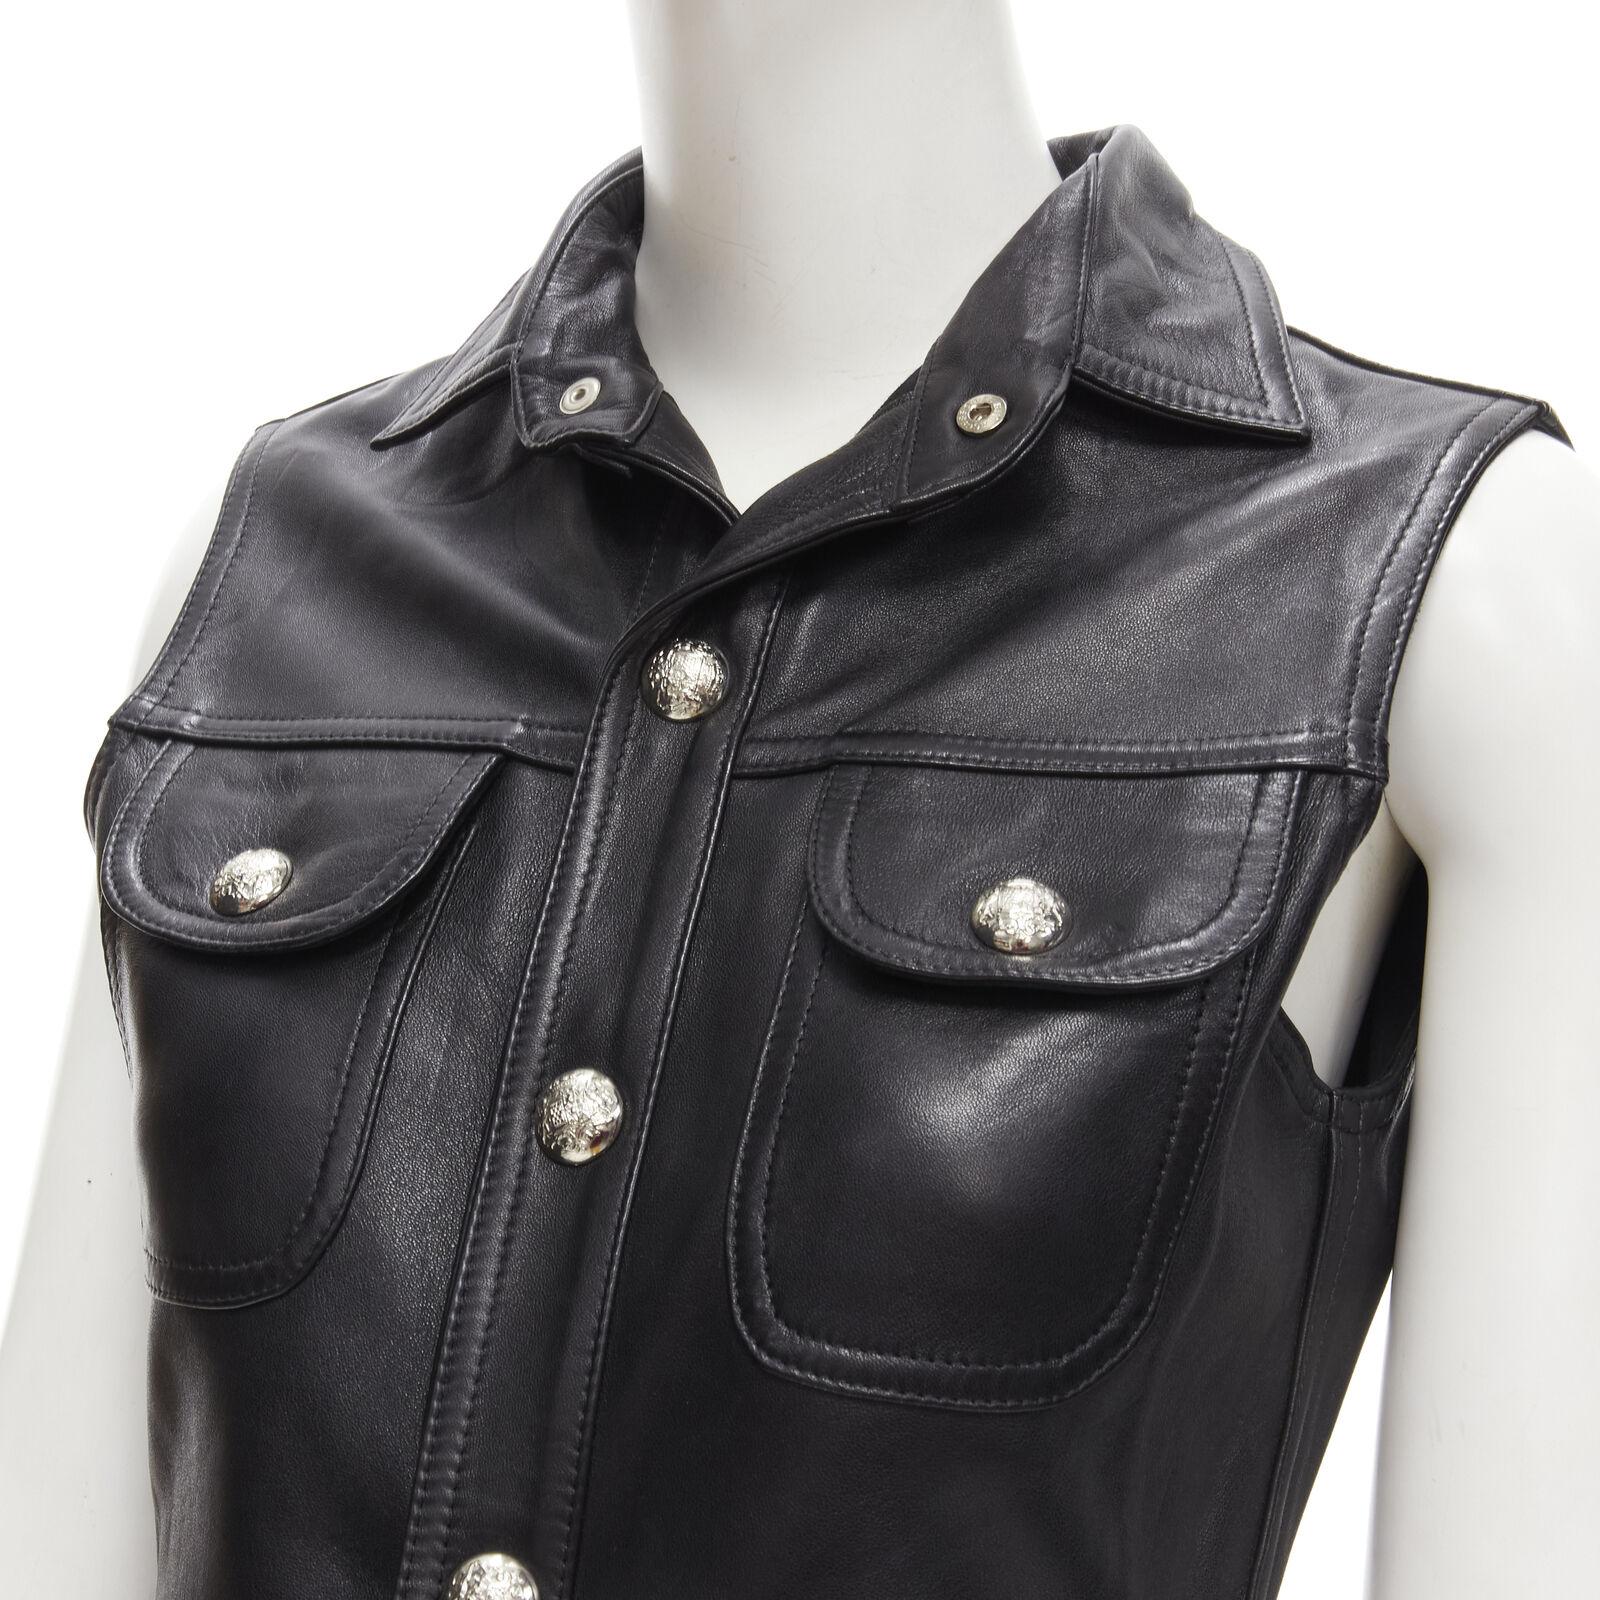 MANOKHI black genuine leather military crest buttons romper FR34 XS
Reference: AAWC/A00118
Brand: Manokhi
Material: Calfskin Leather
Color: Black, Silver
Pattern: Solid
Closure: Snap Buttons
Lining: Unlined
Extra Details: Genuine leather upper.